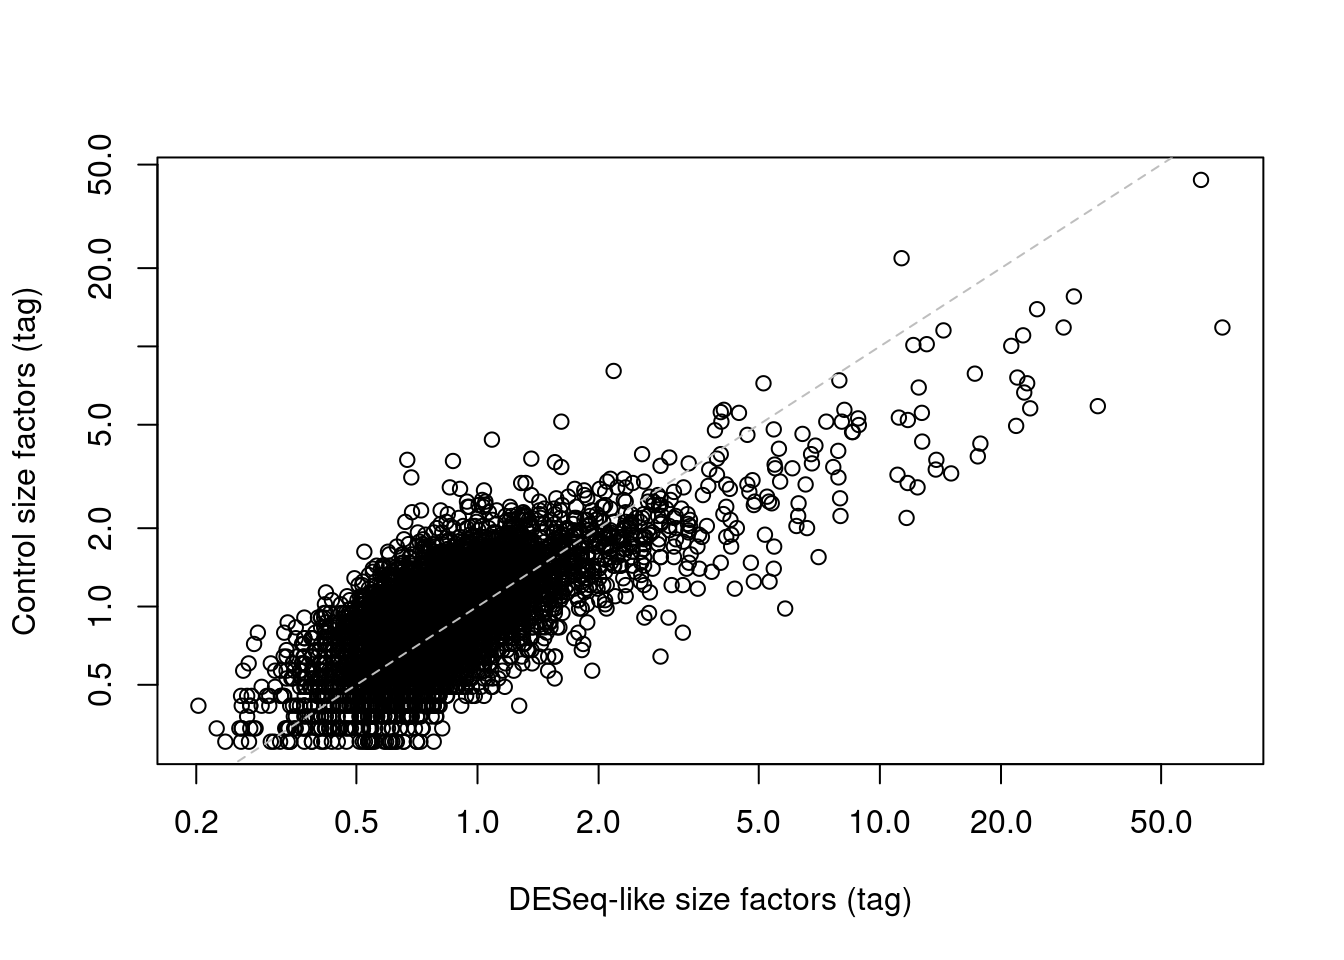 IgG control-derived size factors for each cell in the PBMC dataset, compared to the DESeq-like size factors.